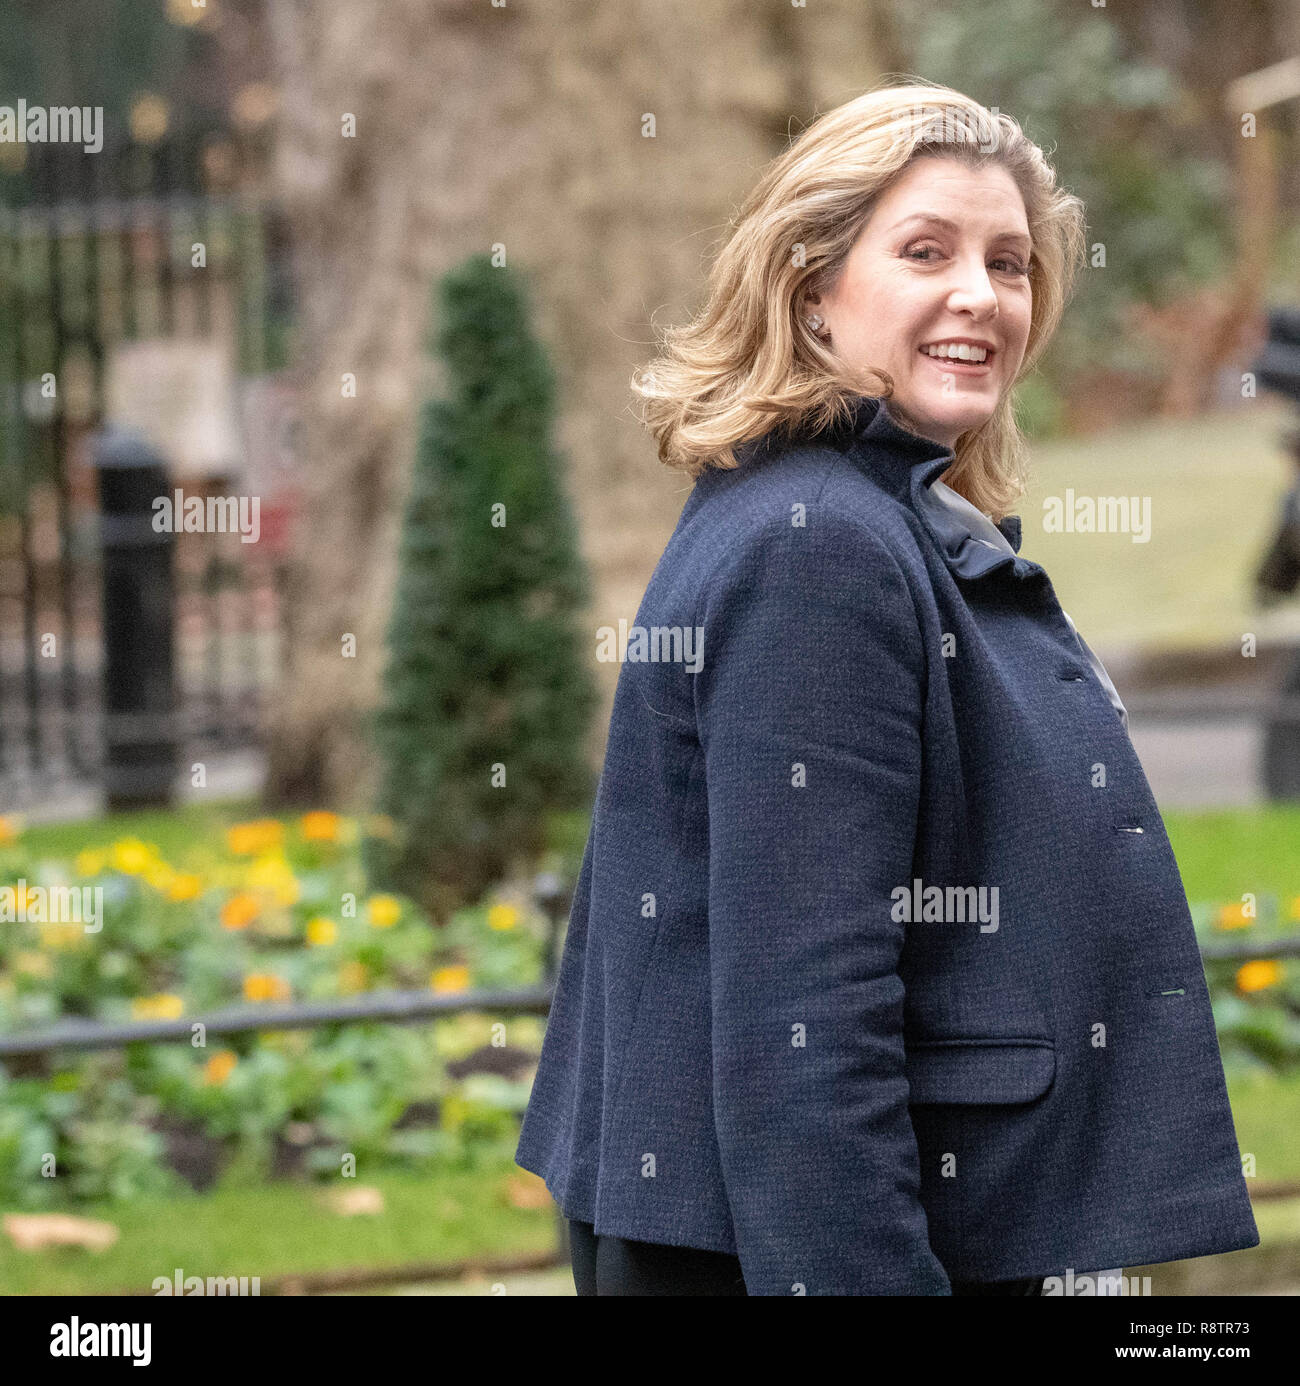 Penny Mordaunt Mp High Resolution Stock Photography and Images - Alamy